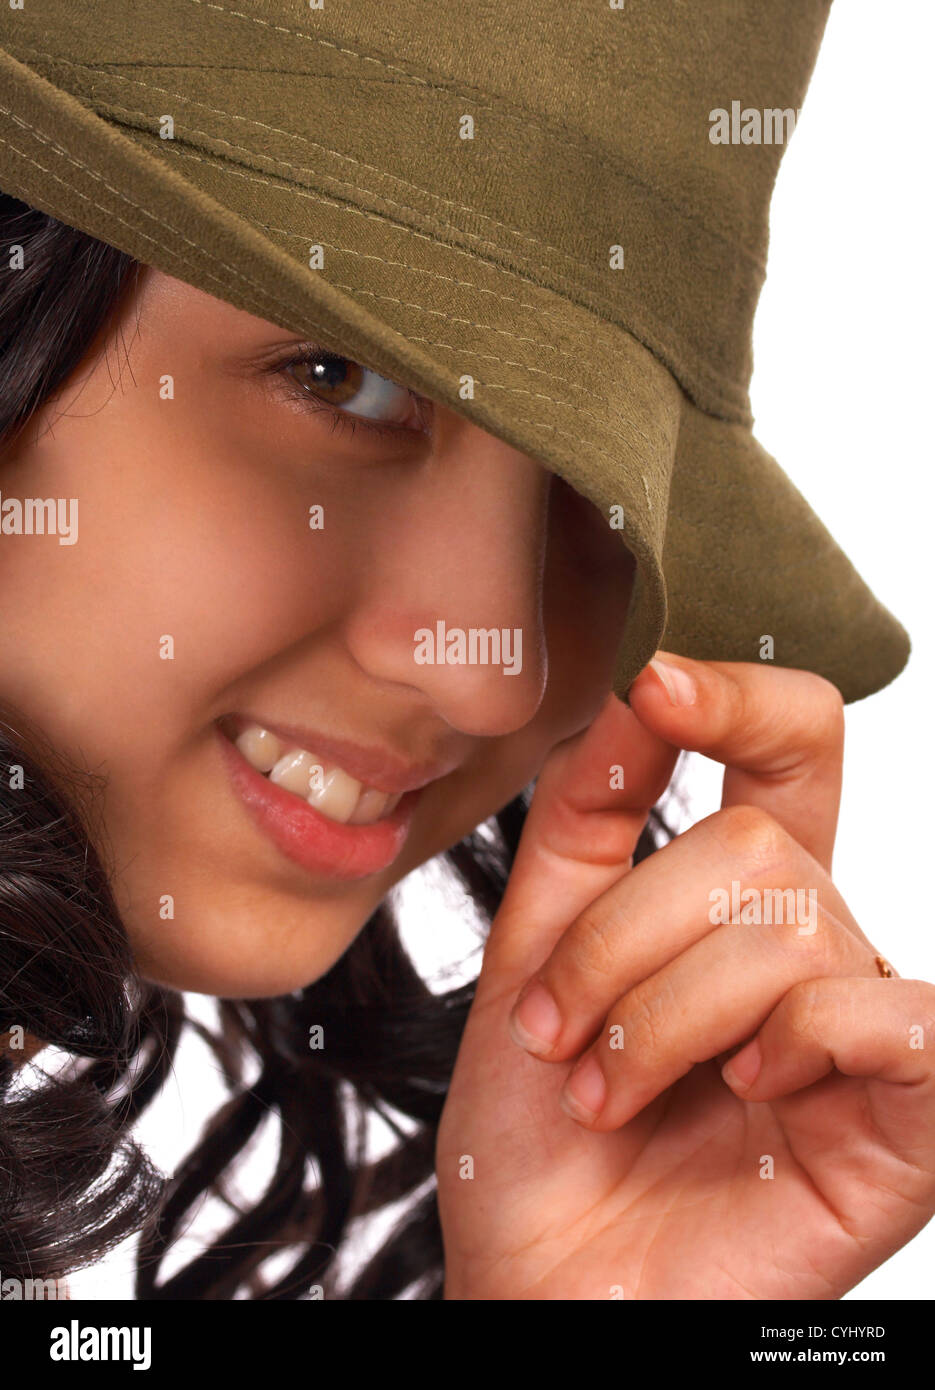 Girl In A Hat Smiling And Looking Cheeky Stock Photo